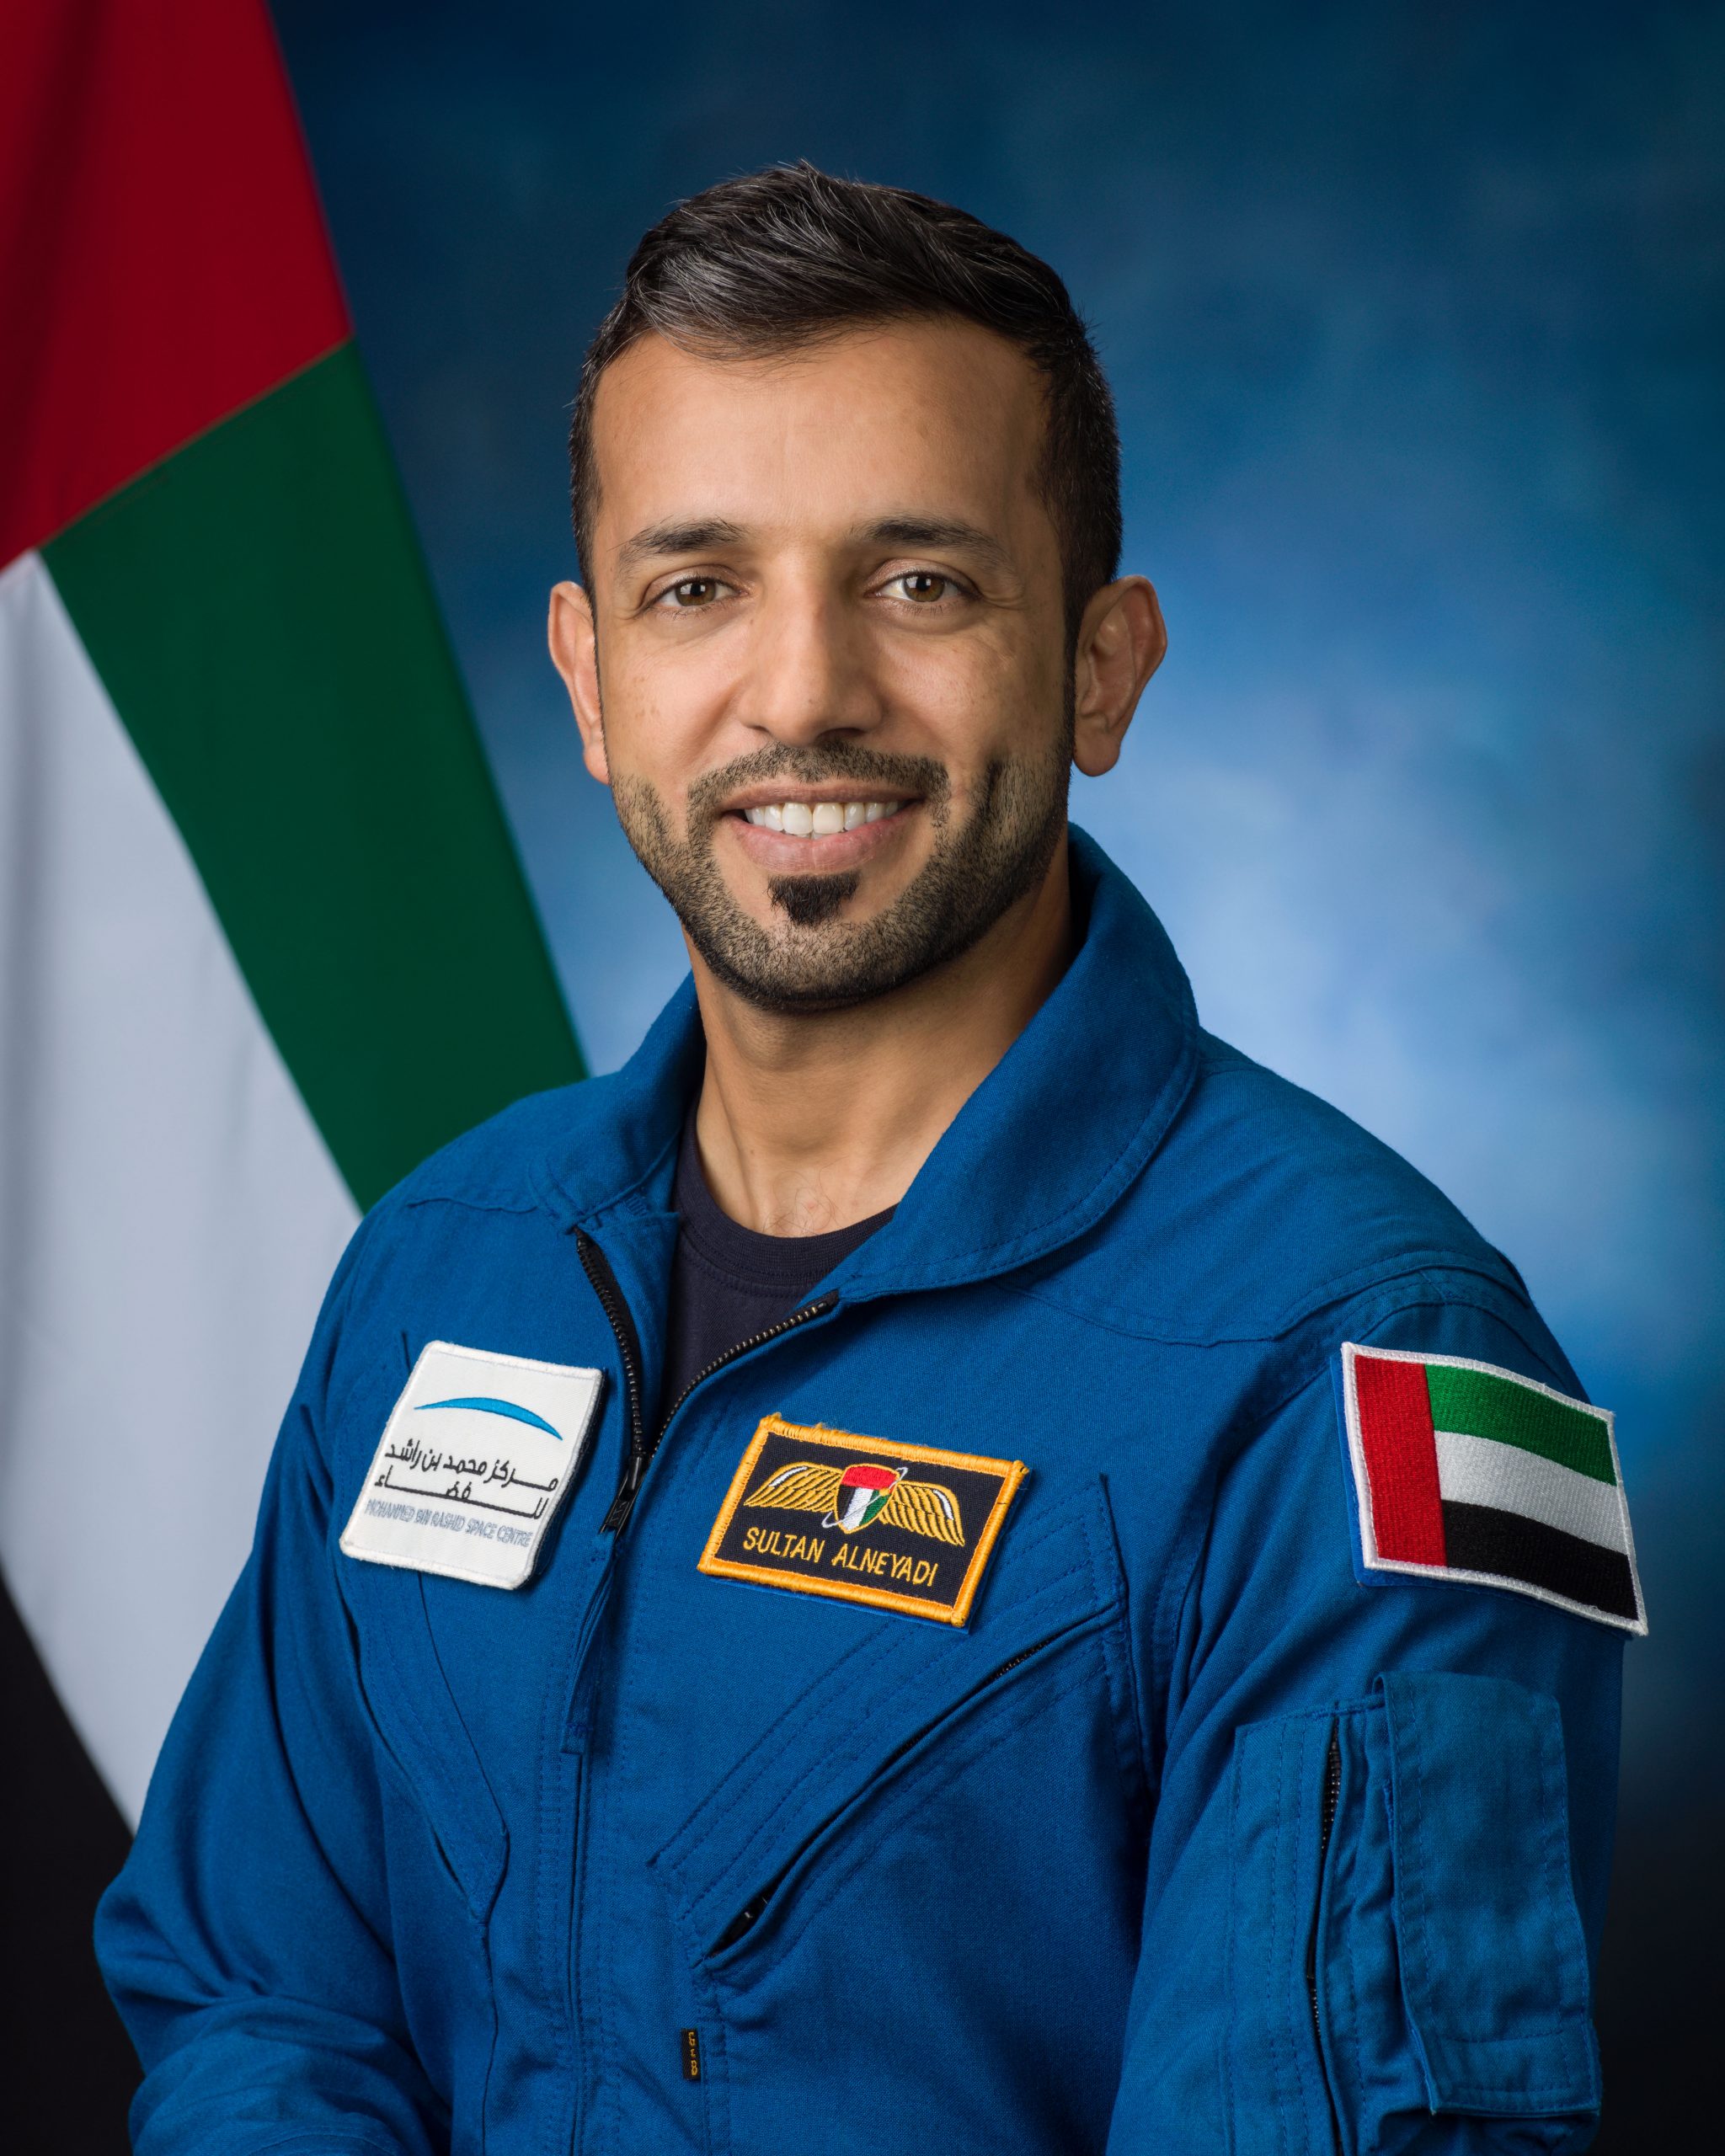 UAE Astronaut Named To SpaceX Crew-6 ISS Mission | Aviation Week Network